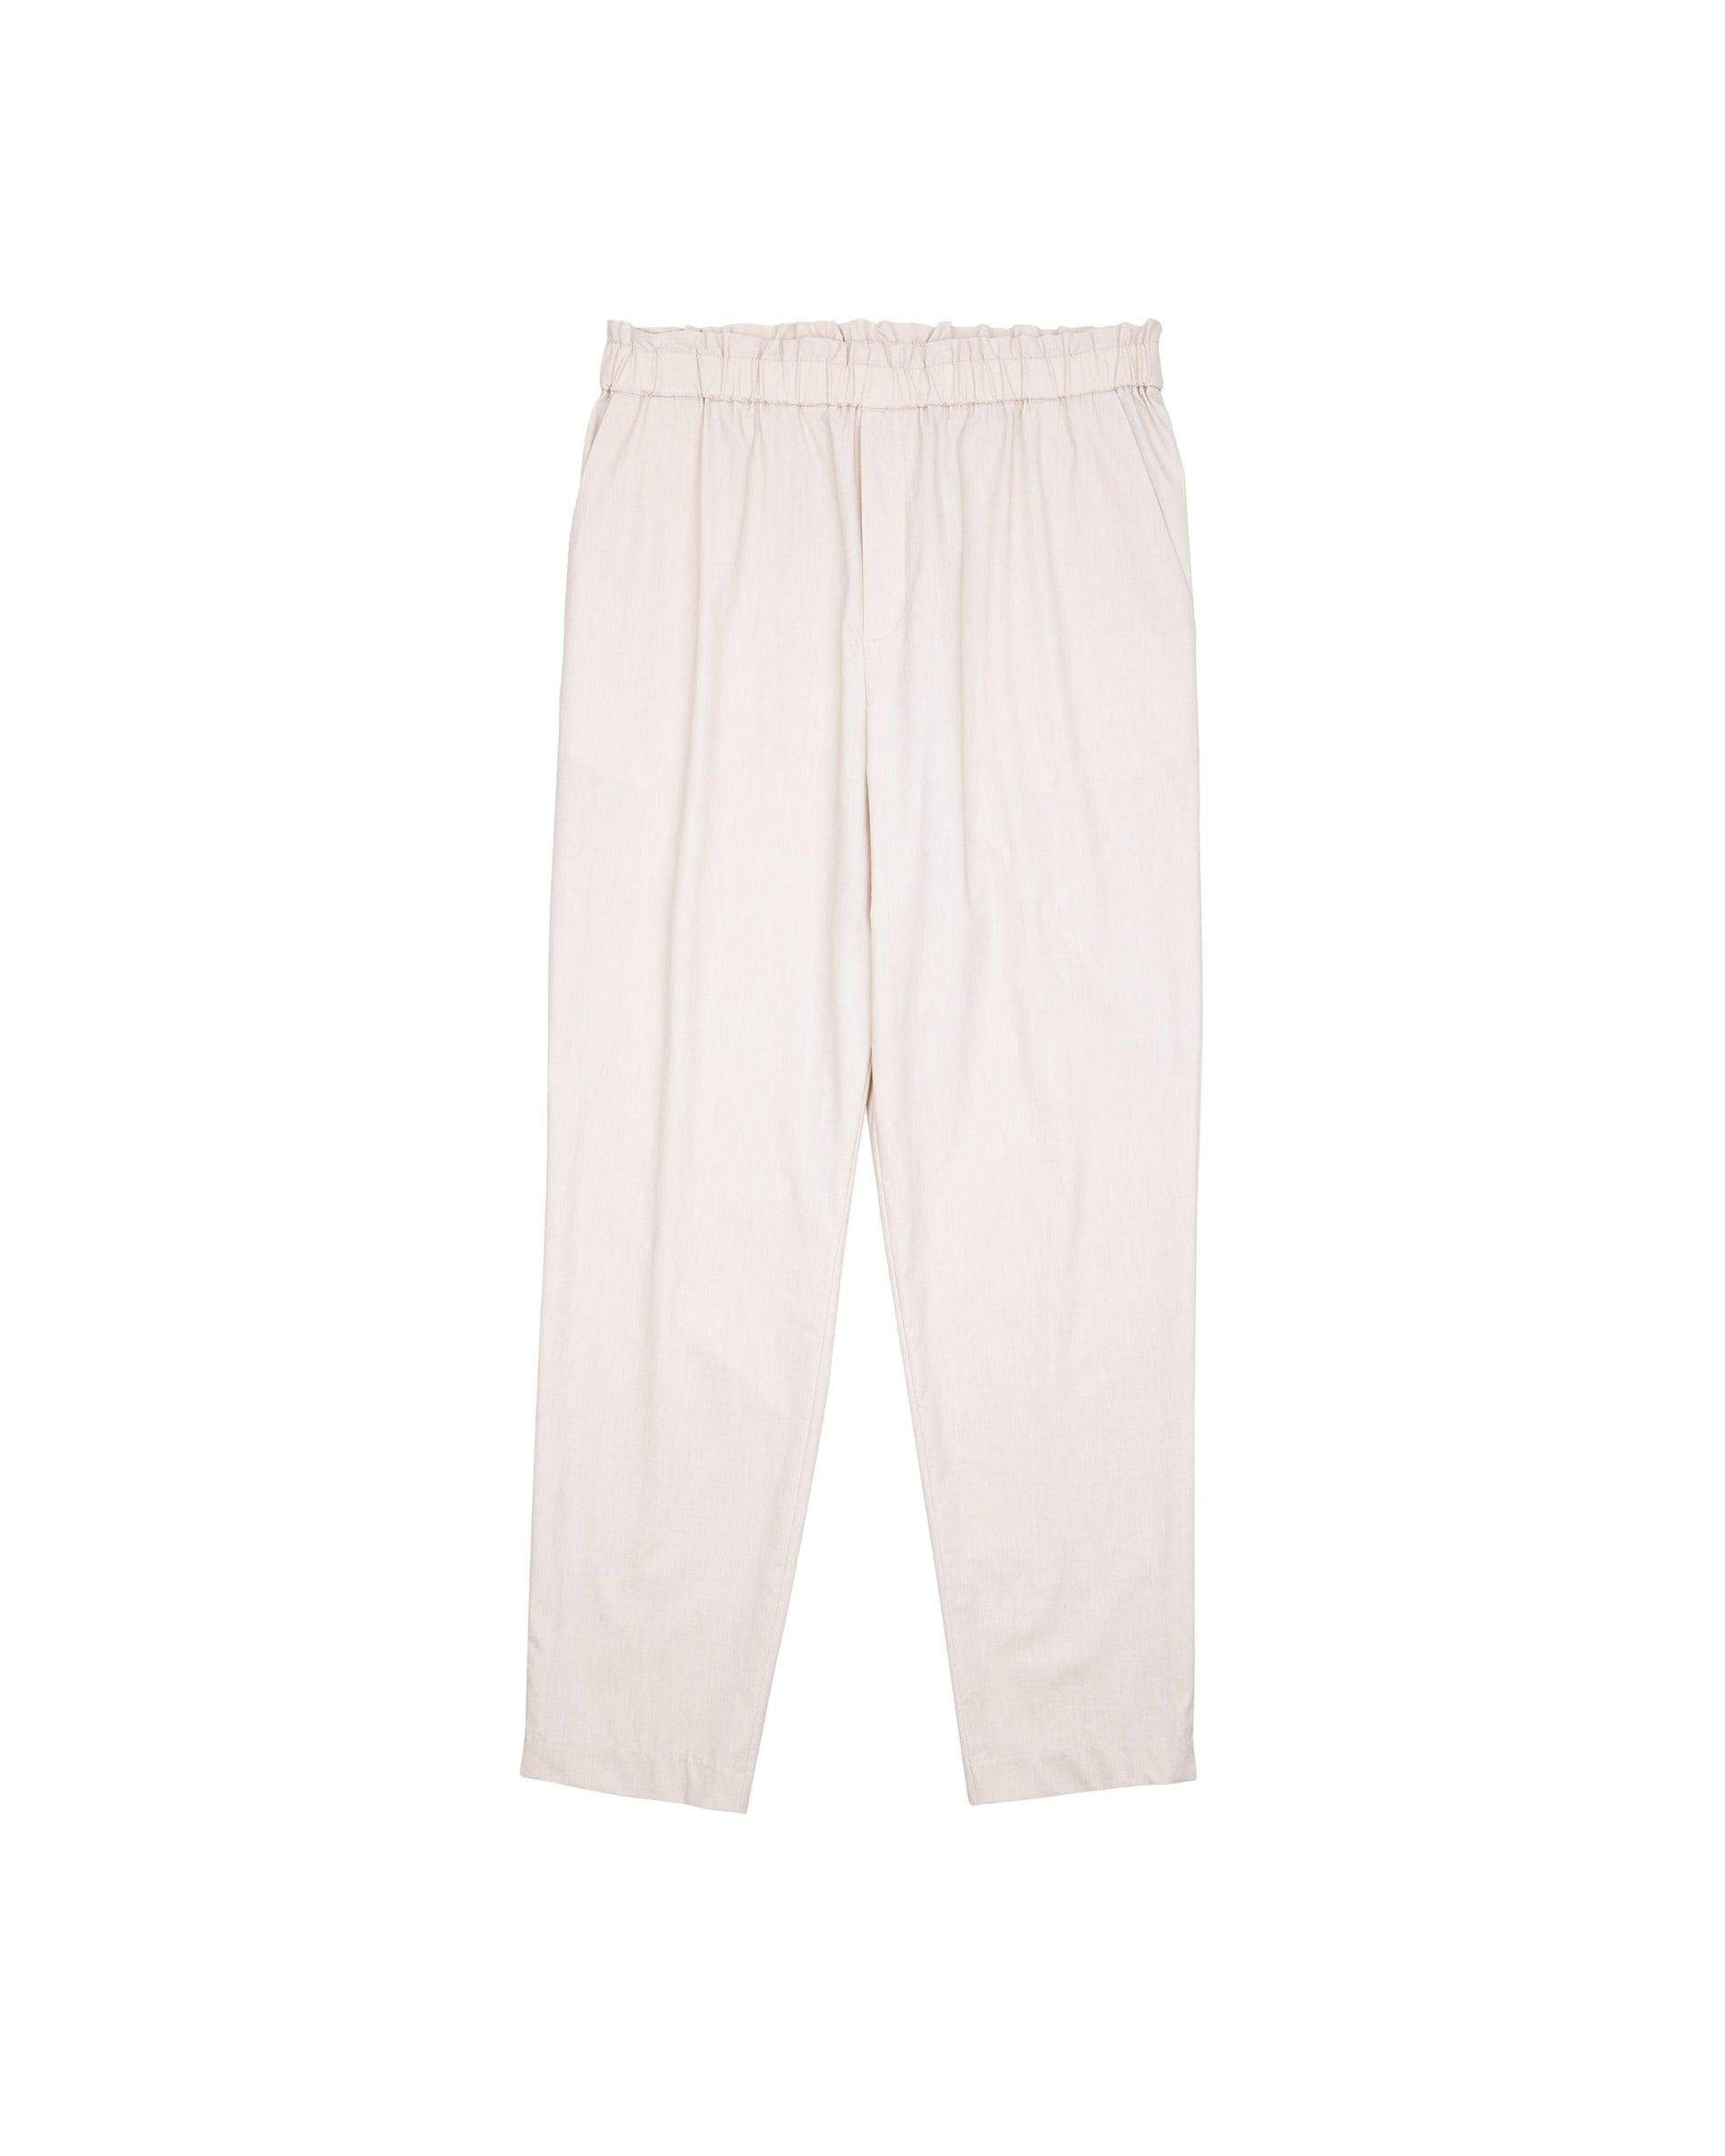 NORAH SUE Ultra Light Airy Pants by COCKTAIL